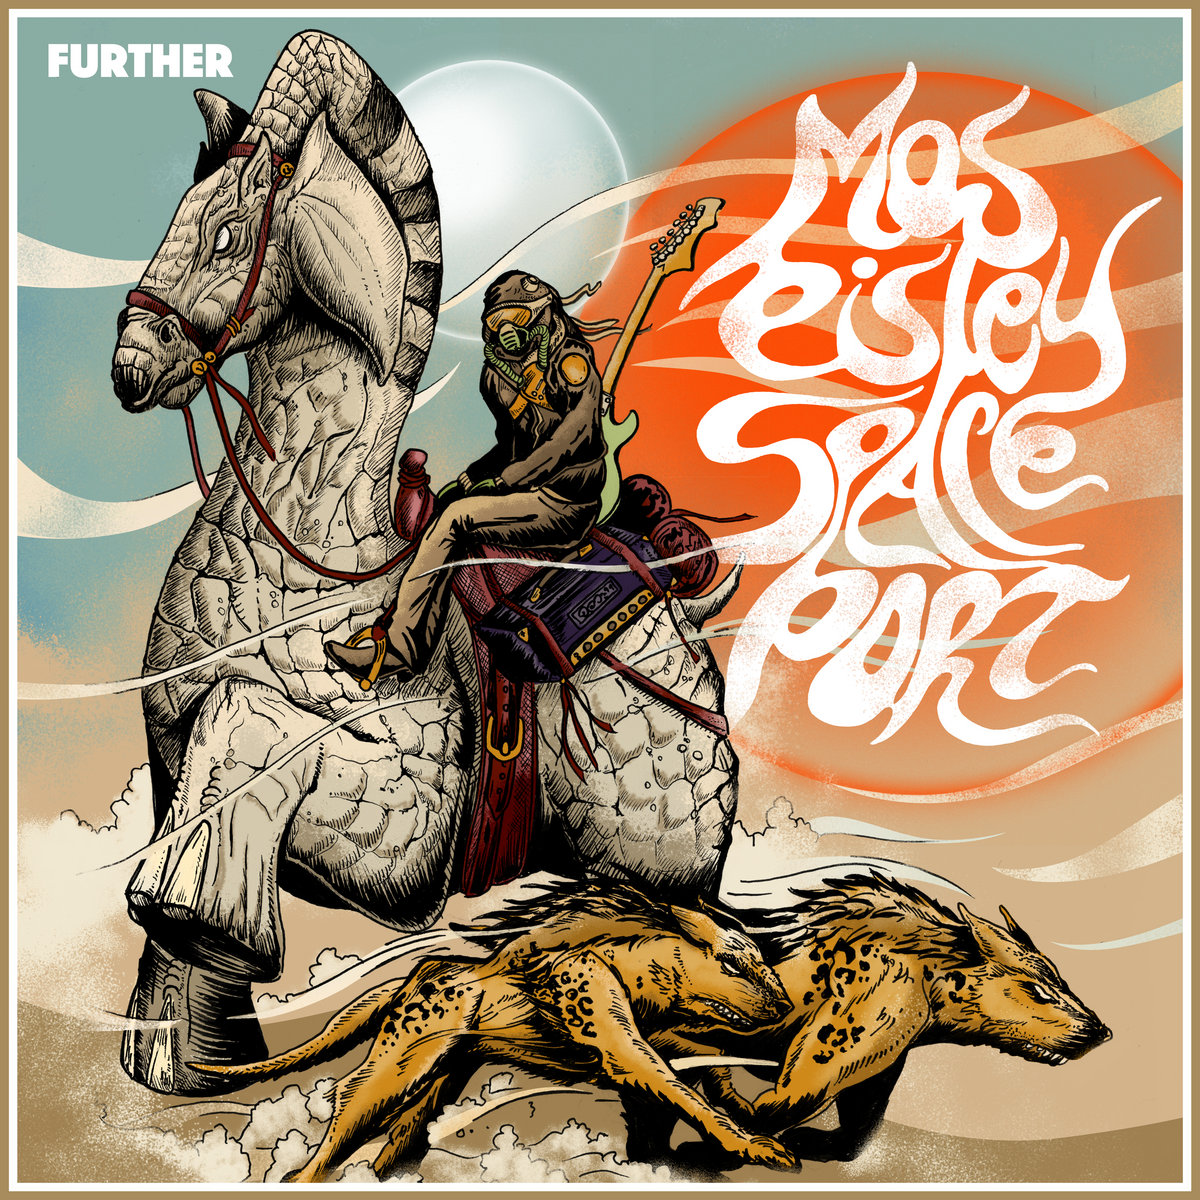 New Music: Further by Mos Eisley Spaceport